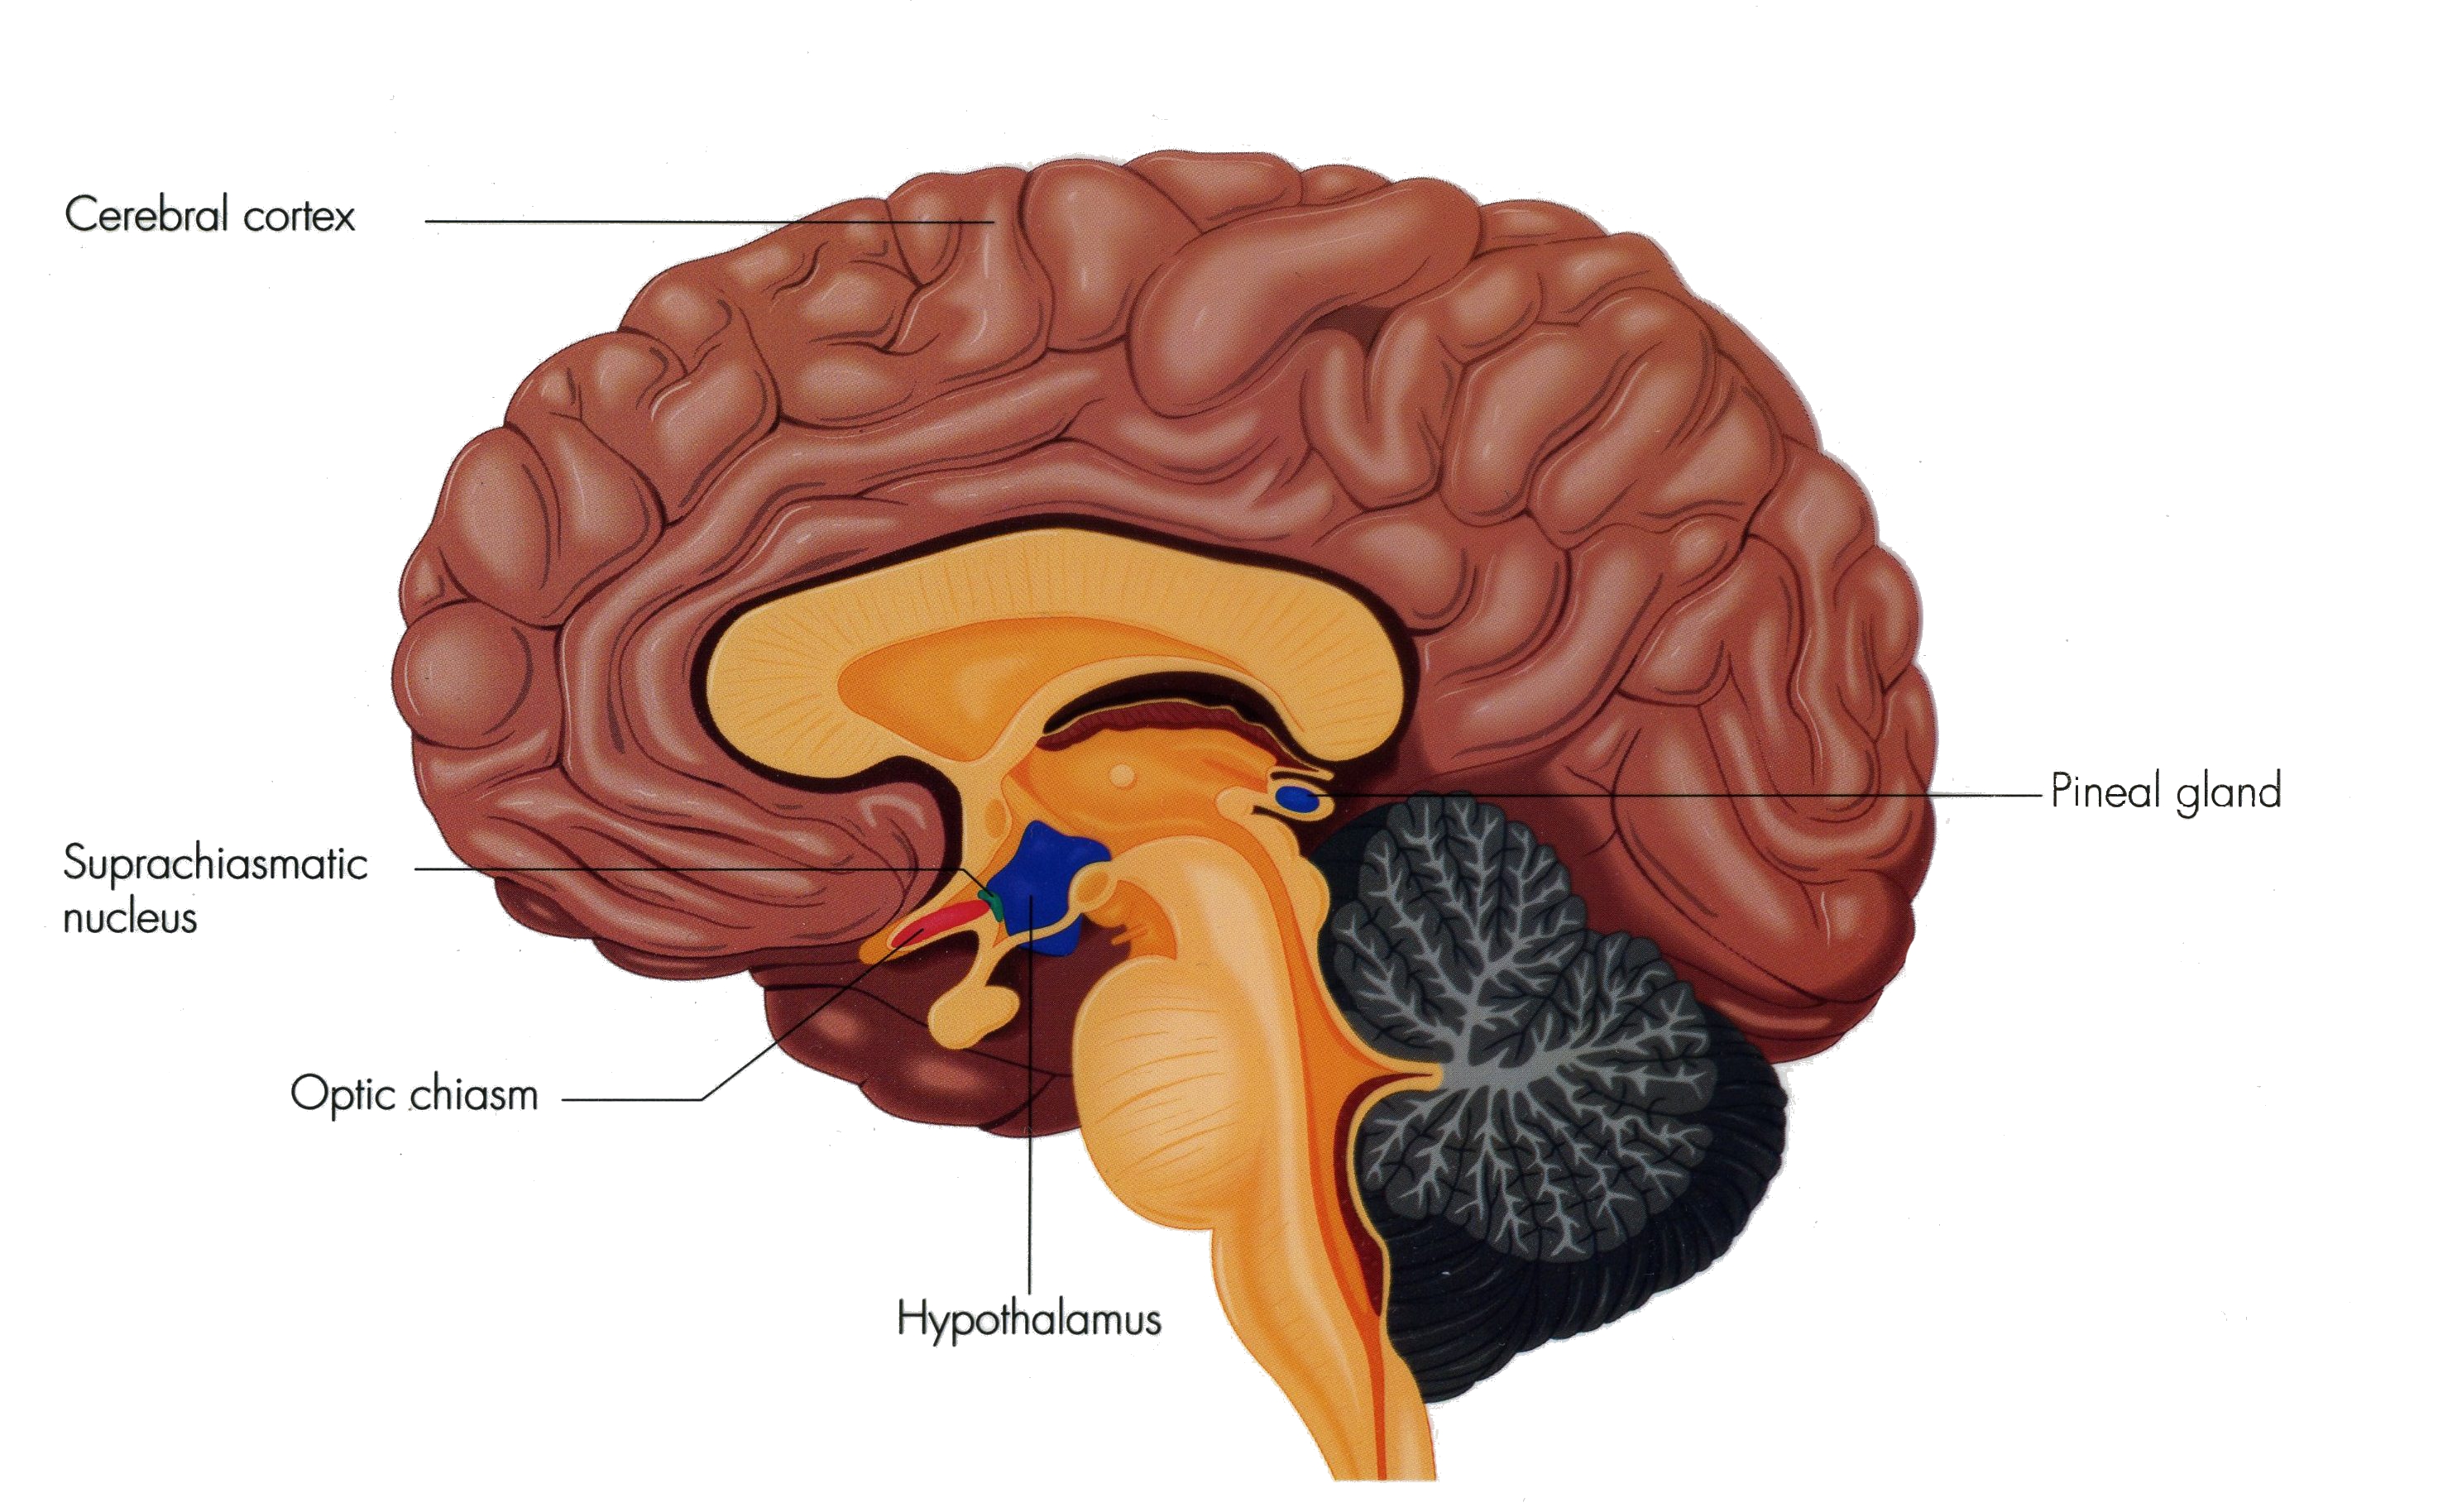 A cutaway of the human brain highlighting structures in the middle